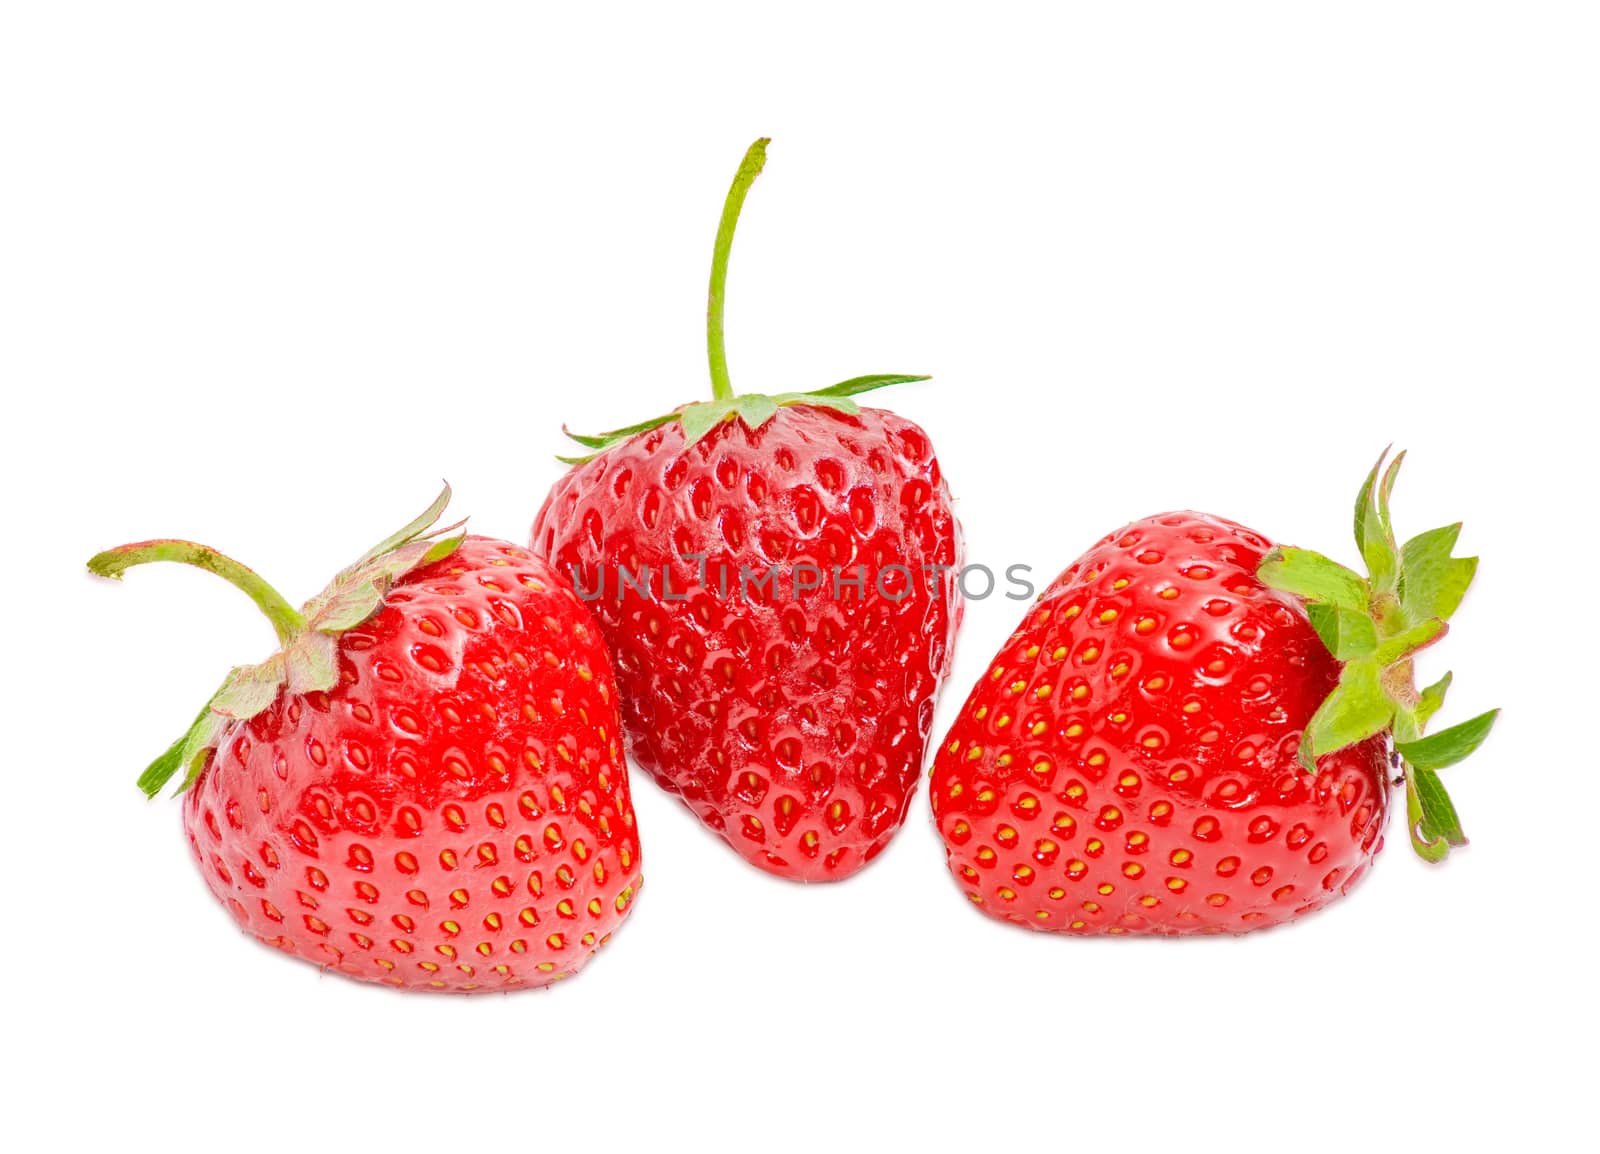 Three ripe fresh berries of the garden strawberry closeup on a light background
